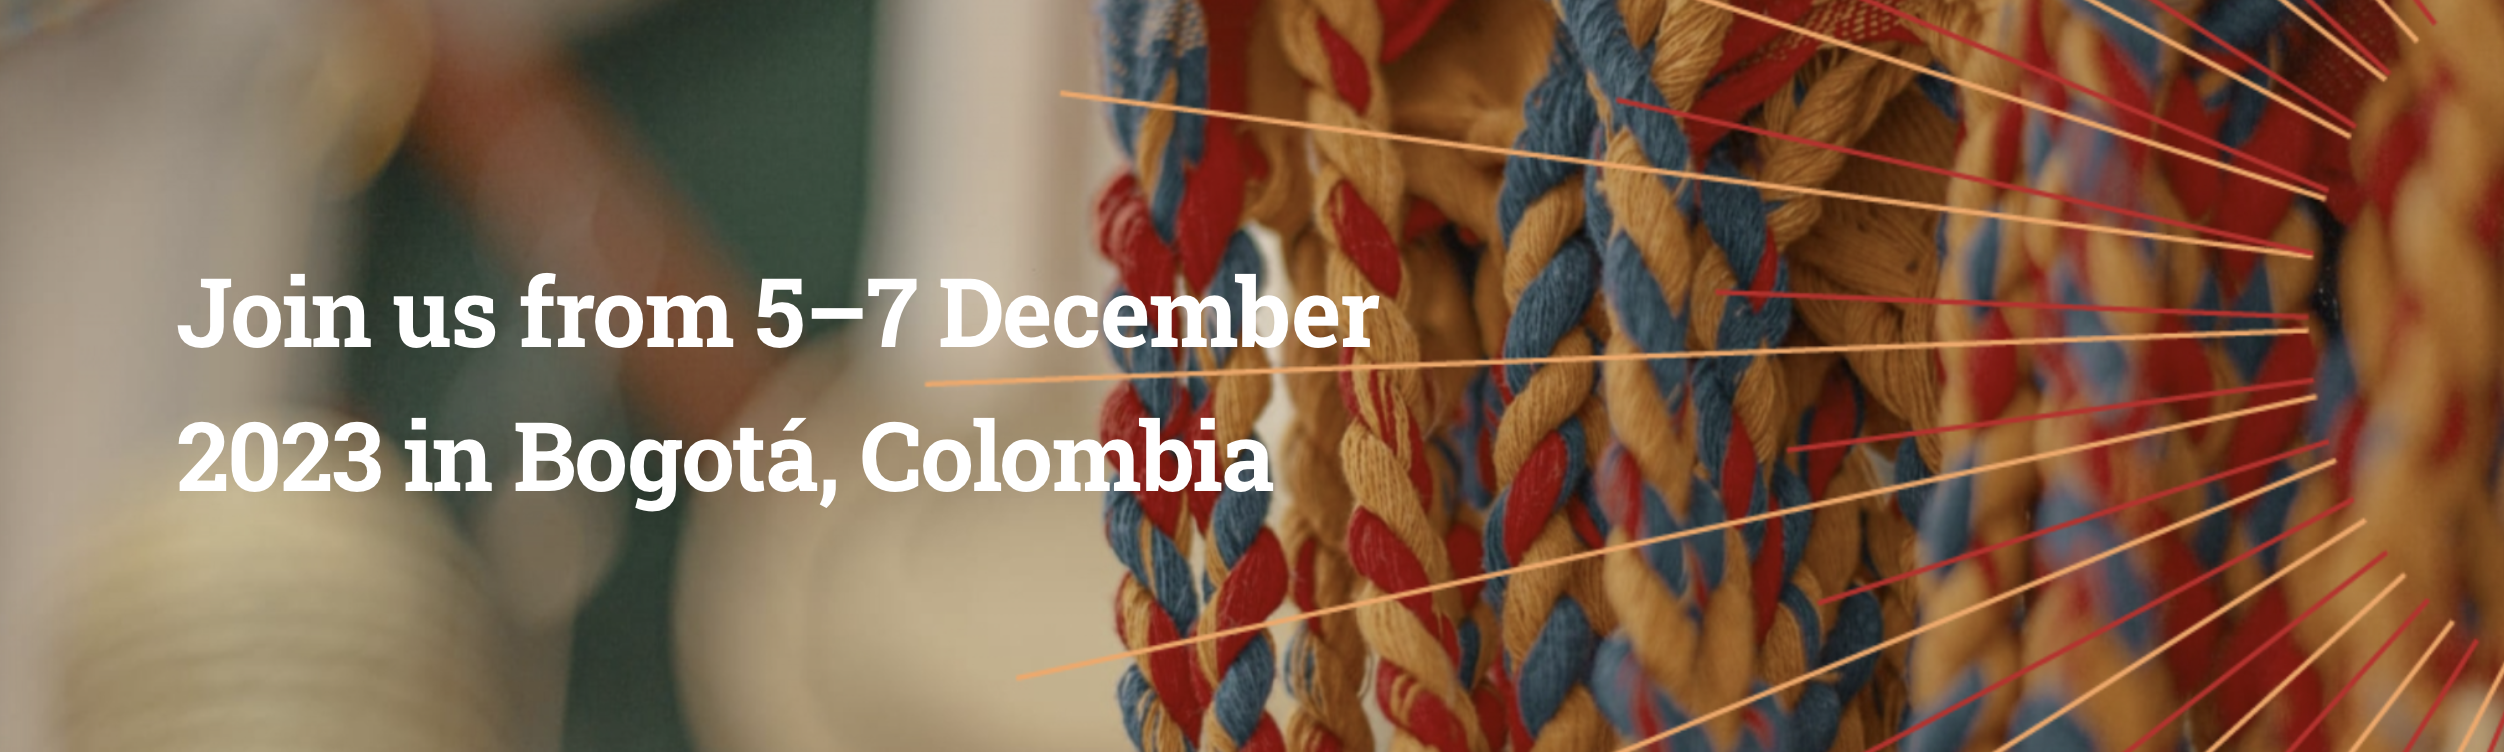 Join one of the many weaving conversations on the road to Bogotá!